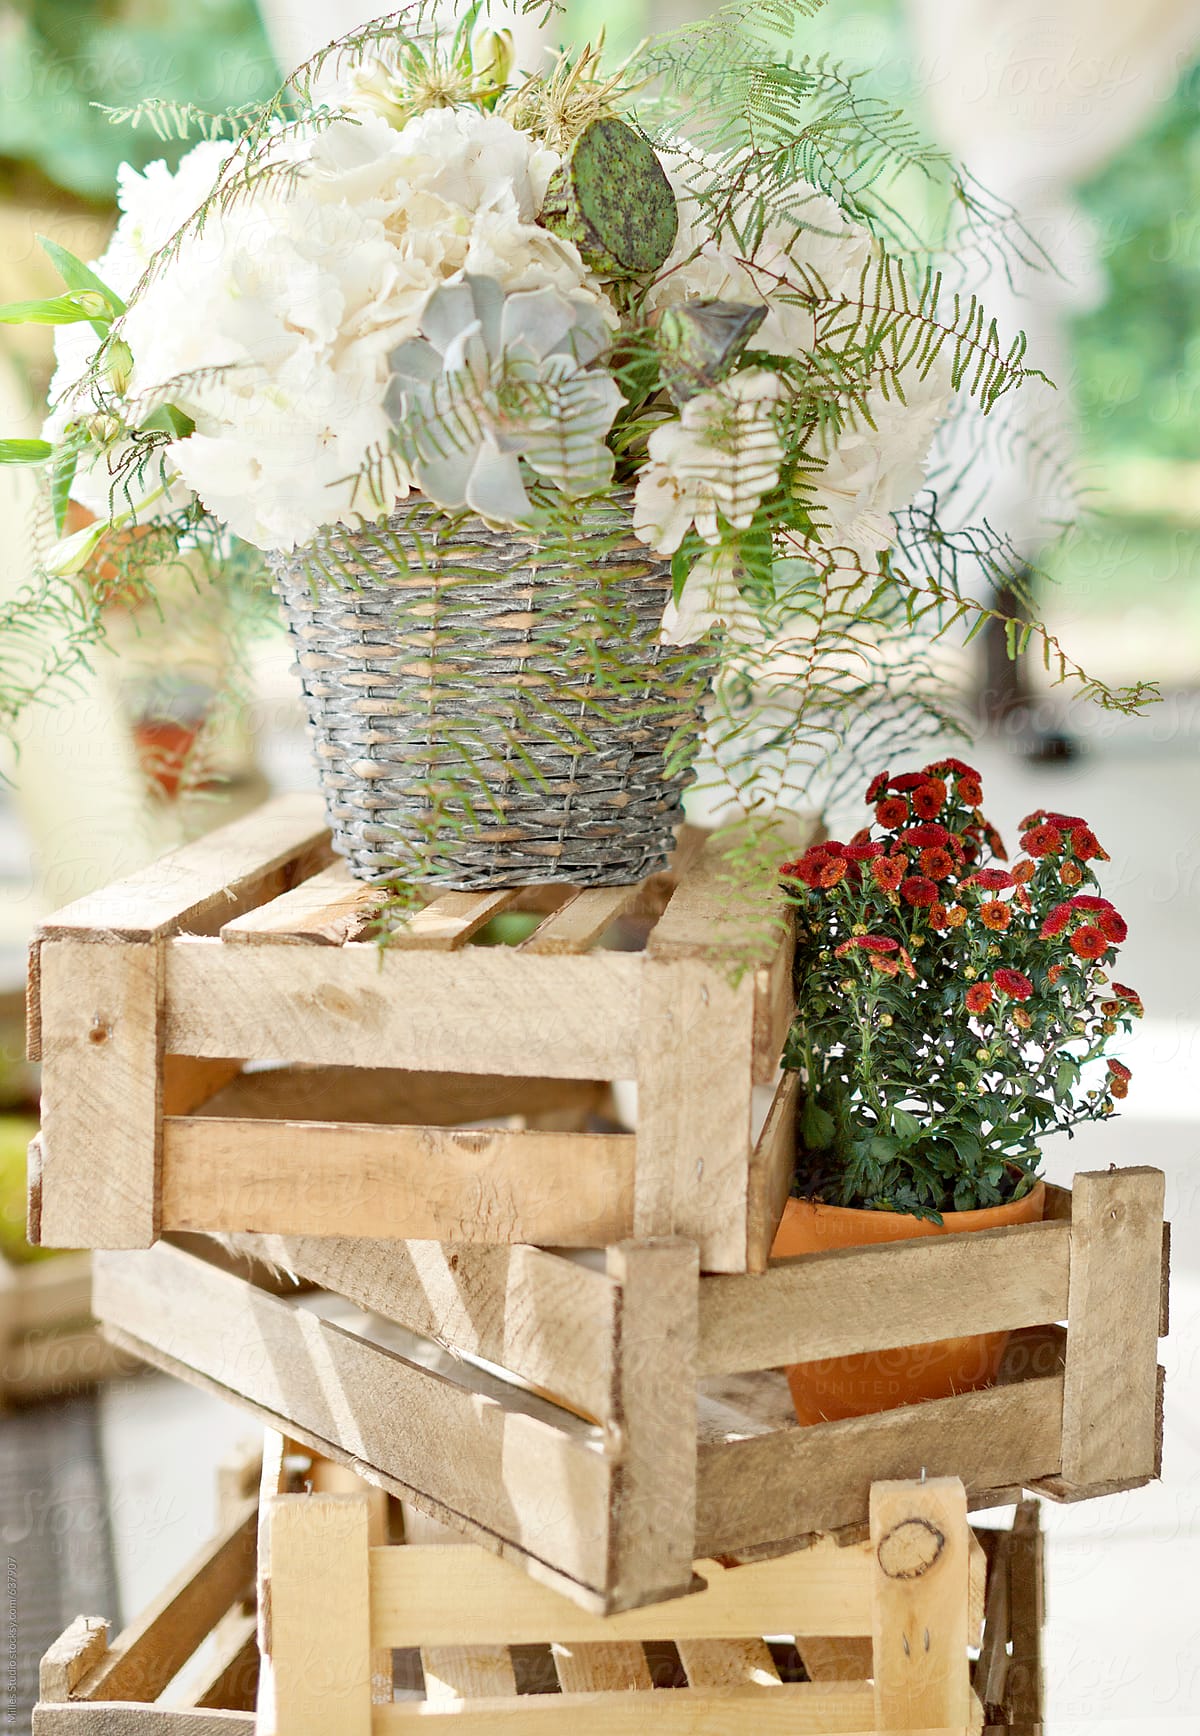 Flowers on wooden Crate